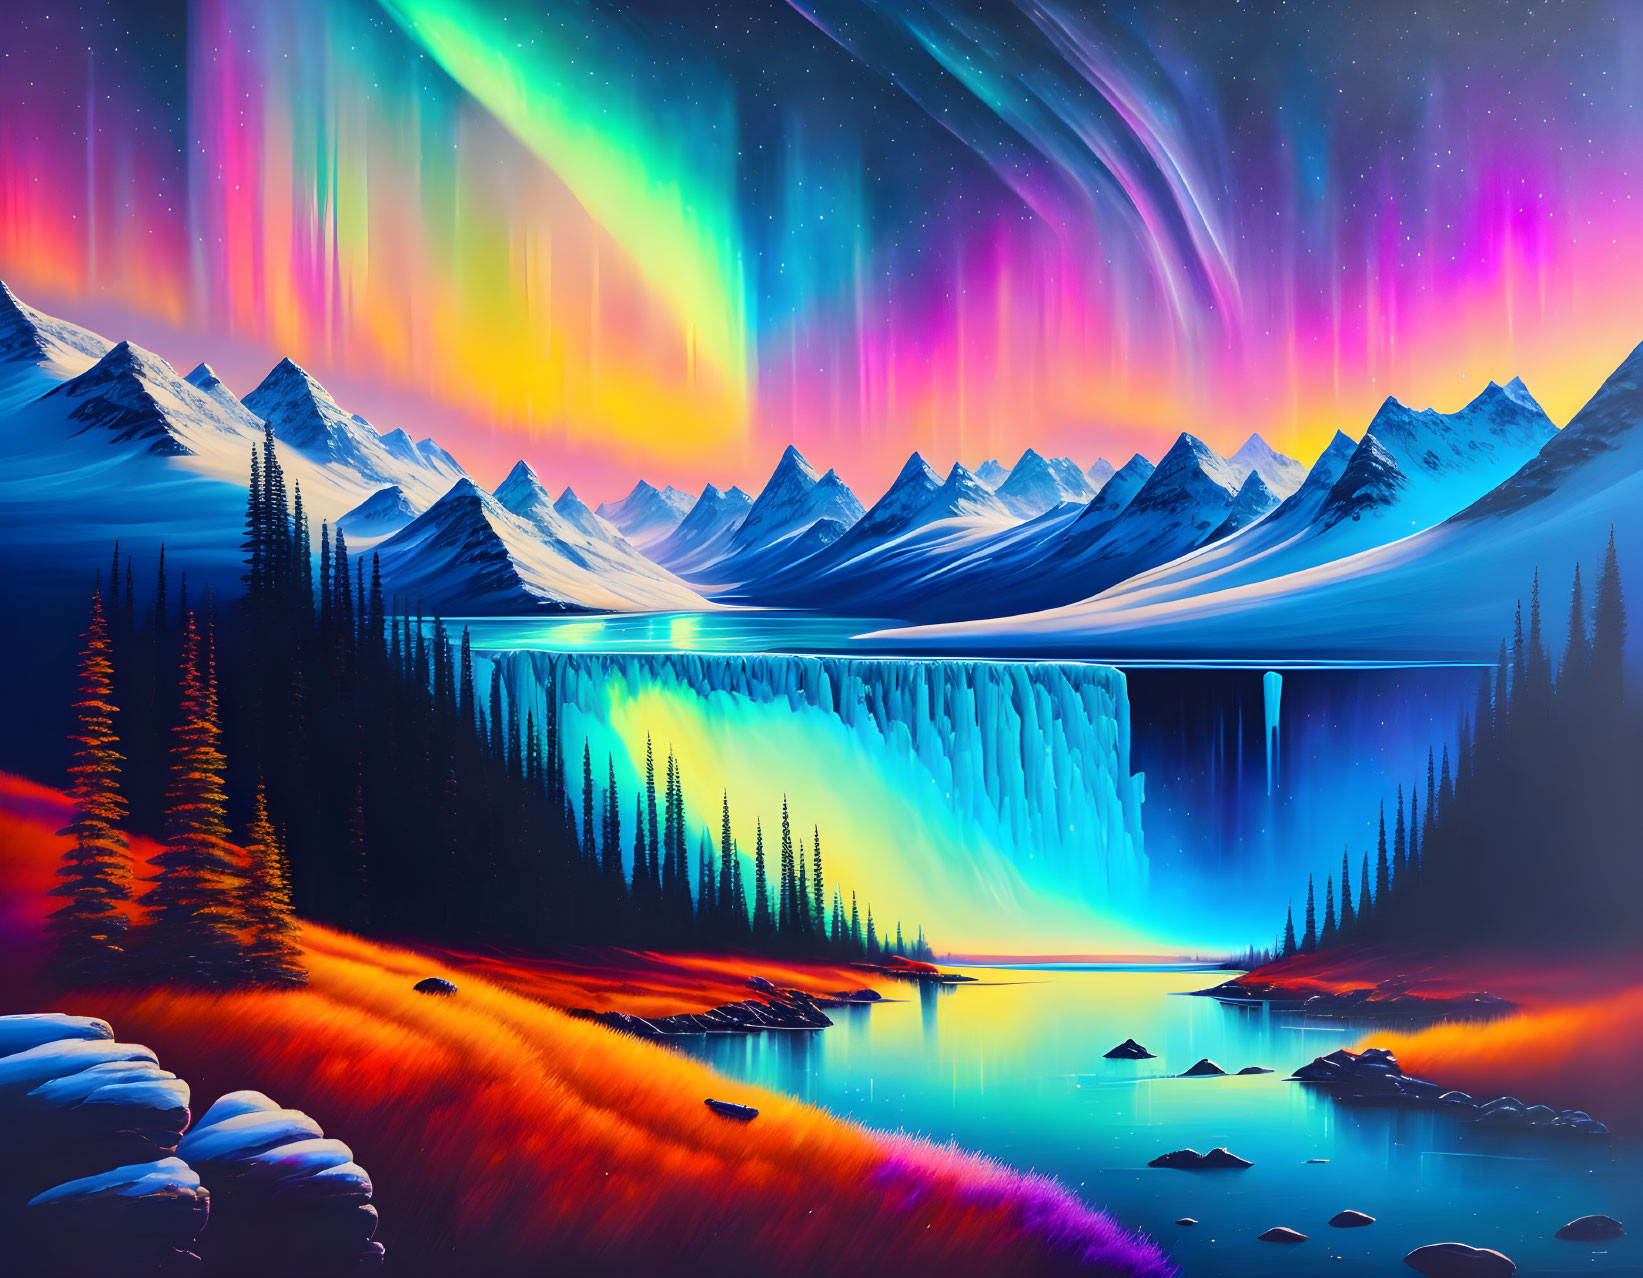 Aurora-filled Sky Over Mountainous Landscape with Waterfall